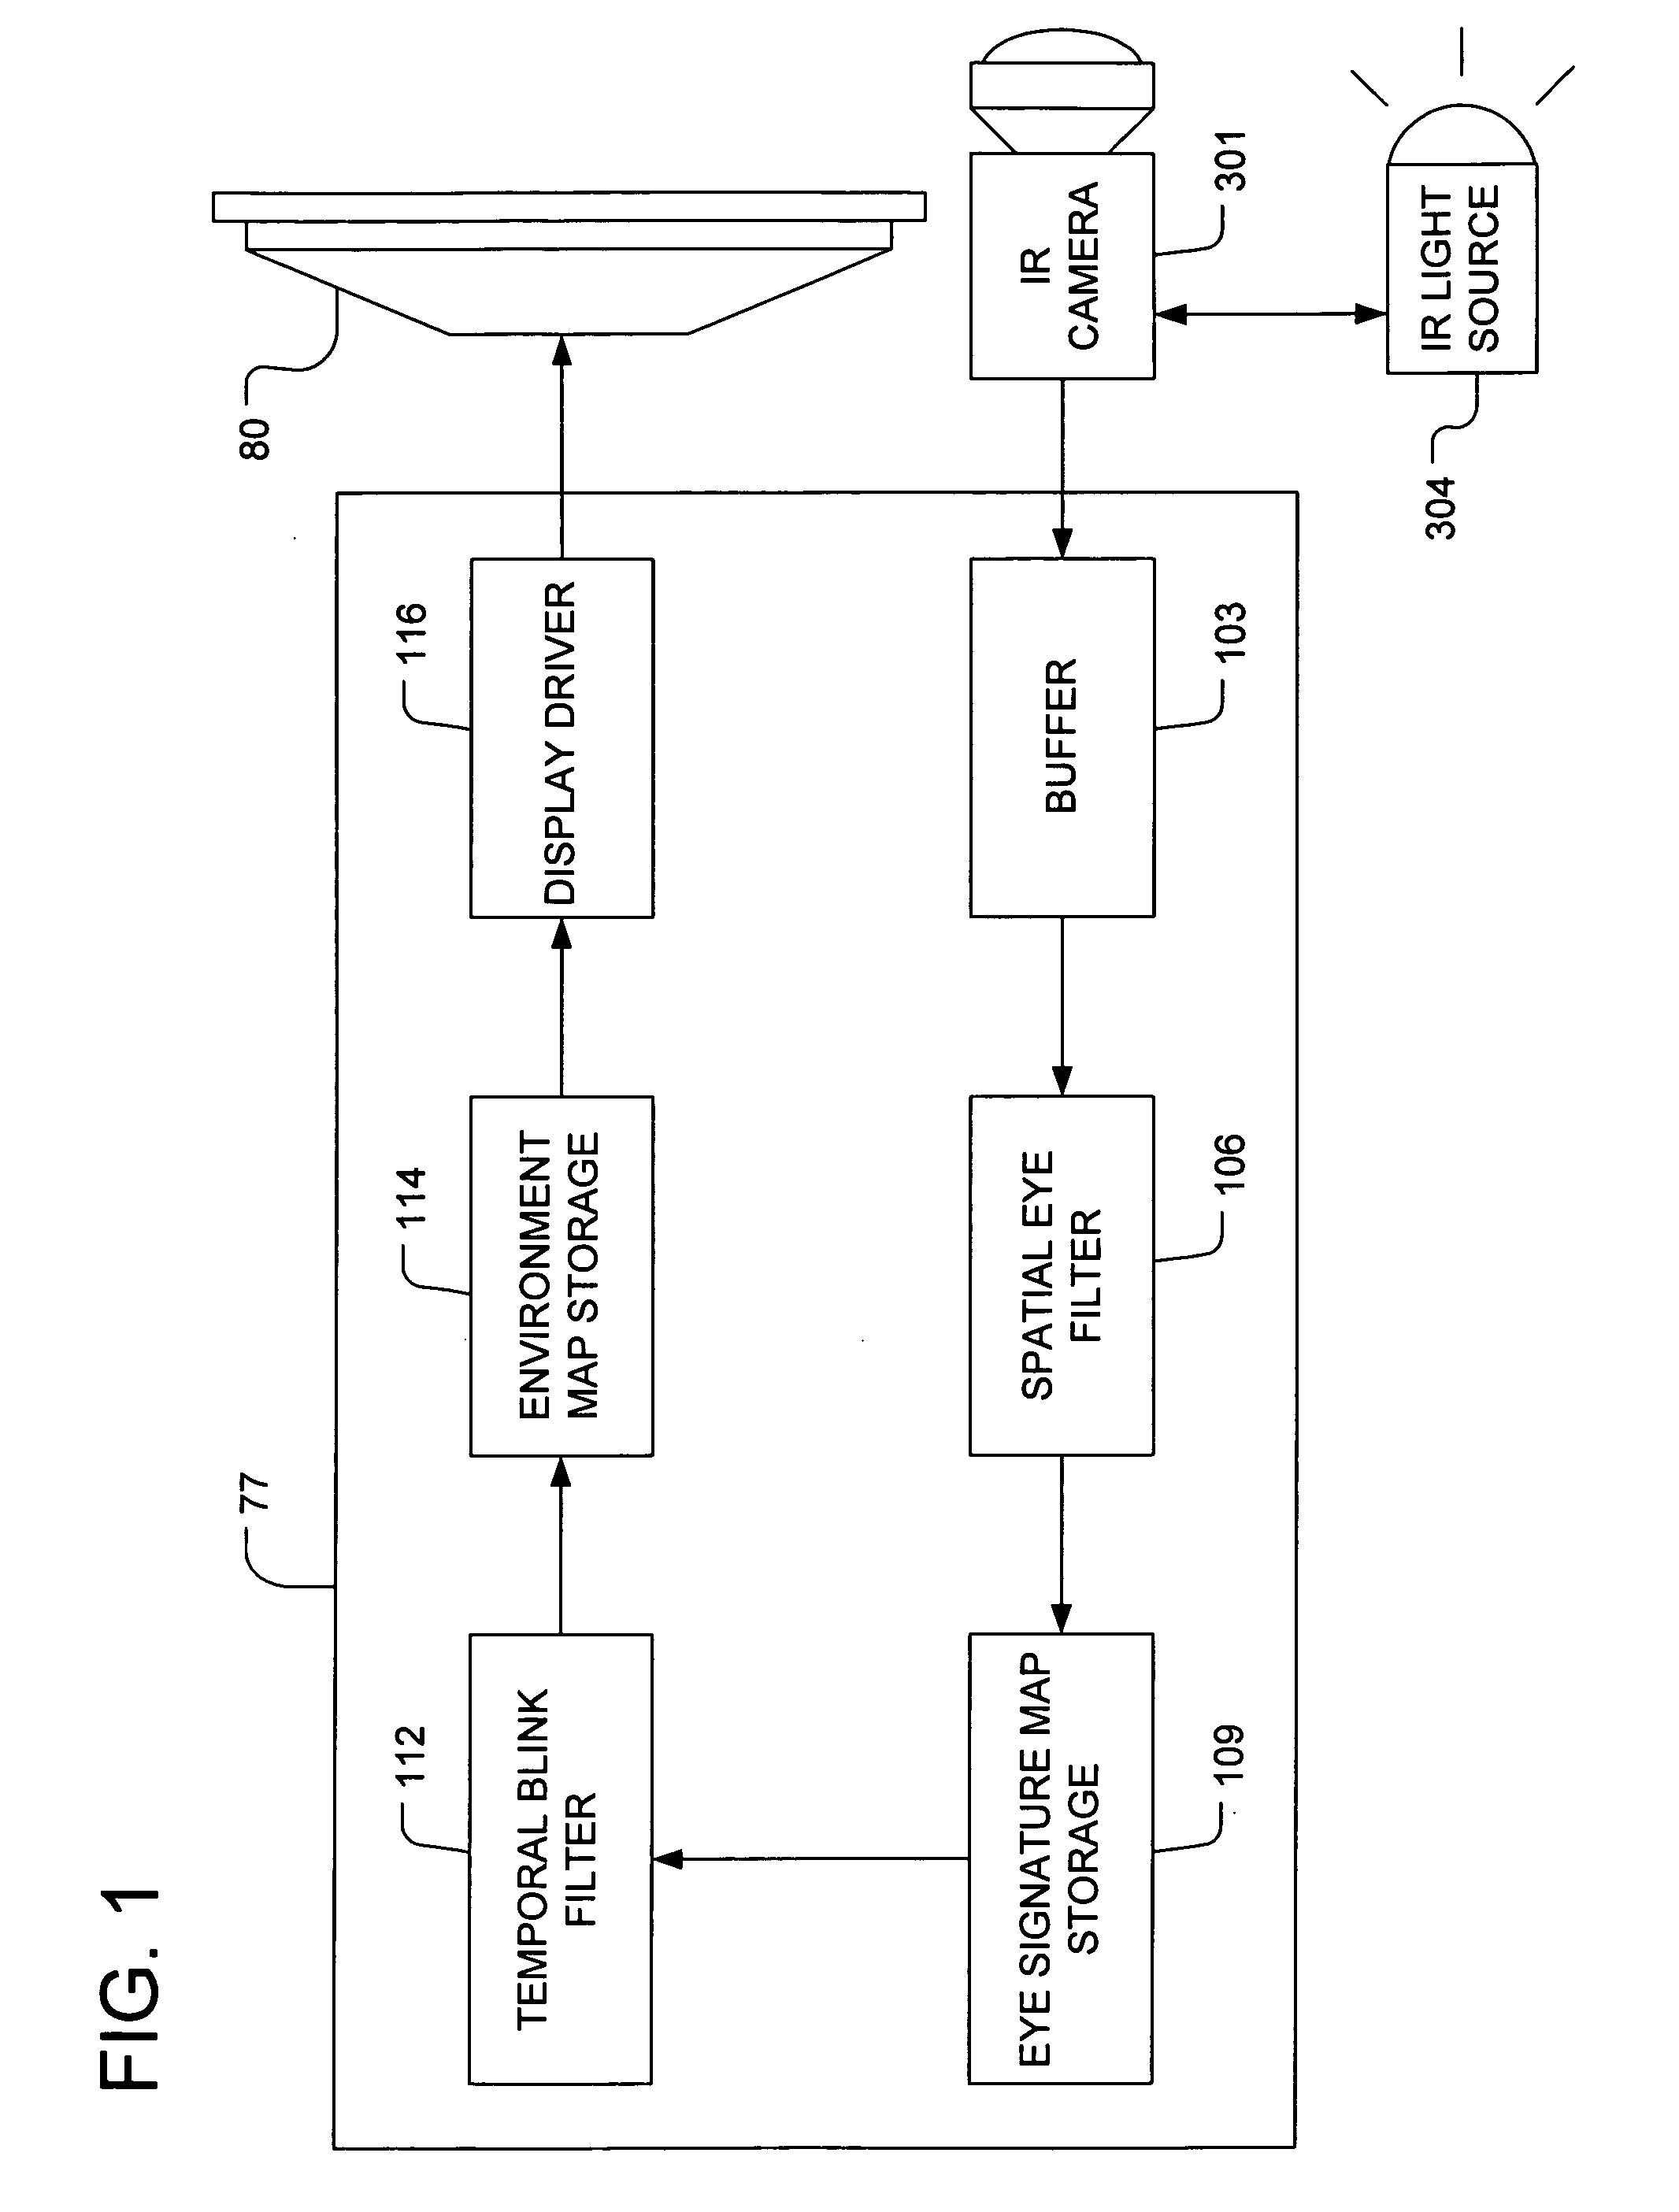 Active environment scanning method and device